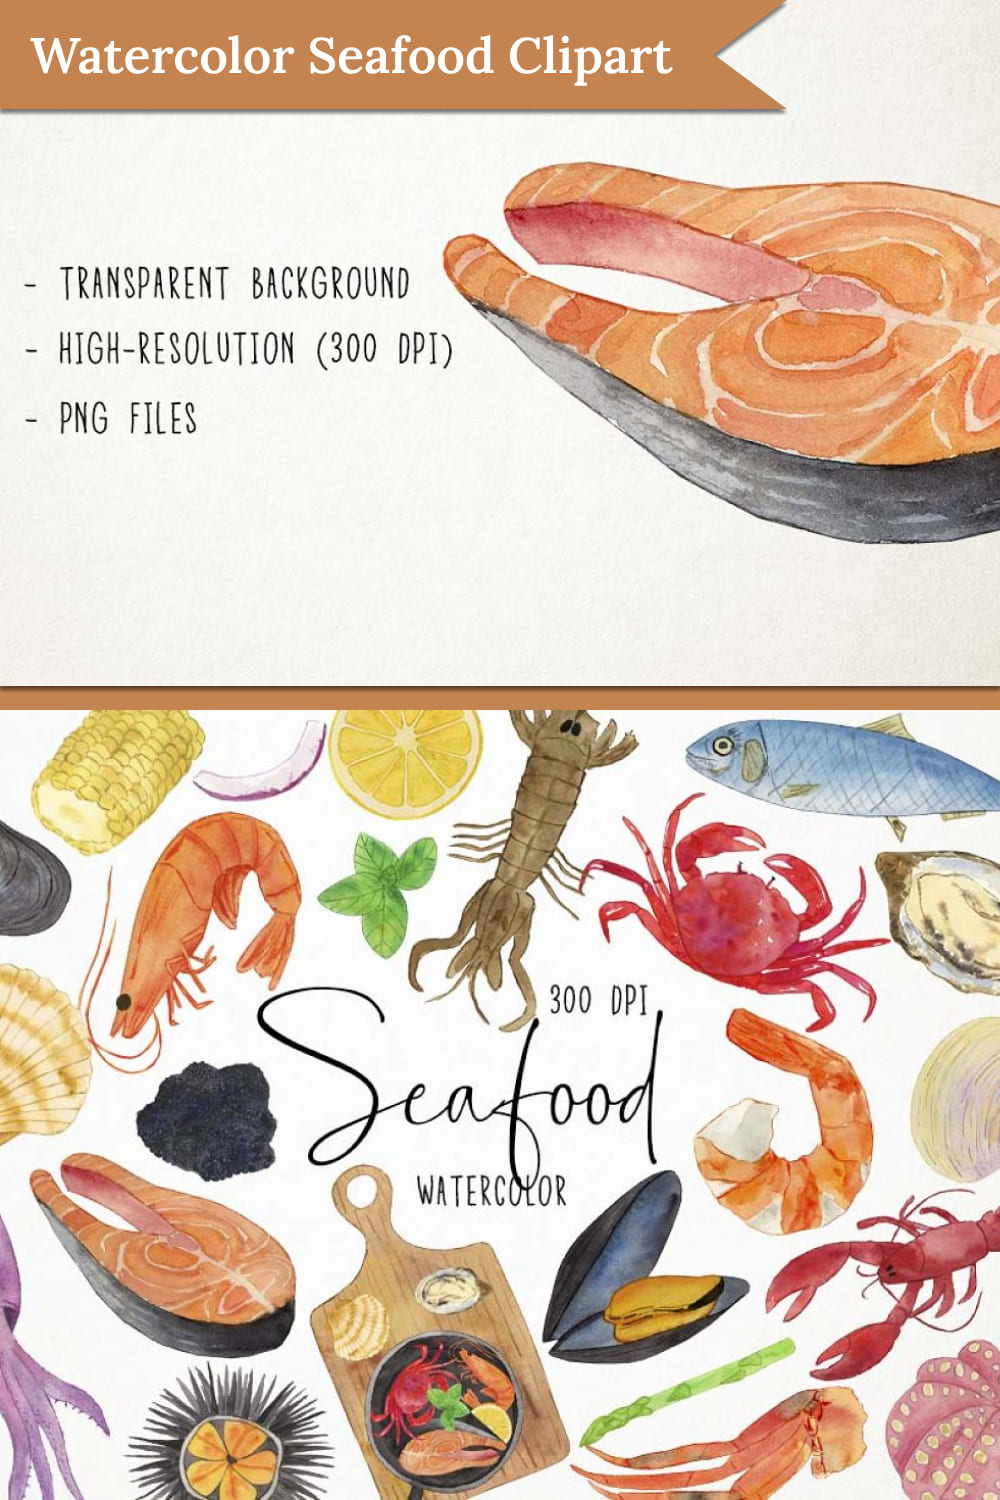 Watercolor seafood clipart fish - pinterest image preview.